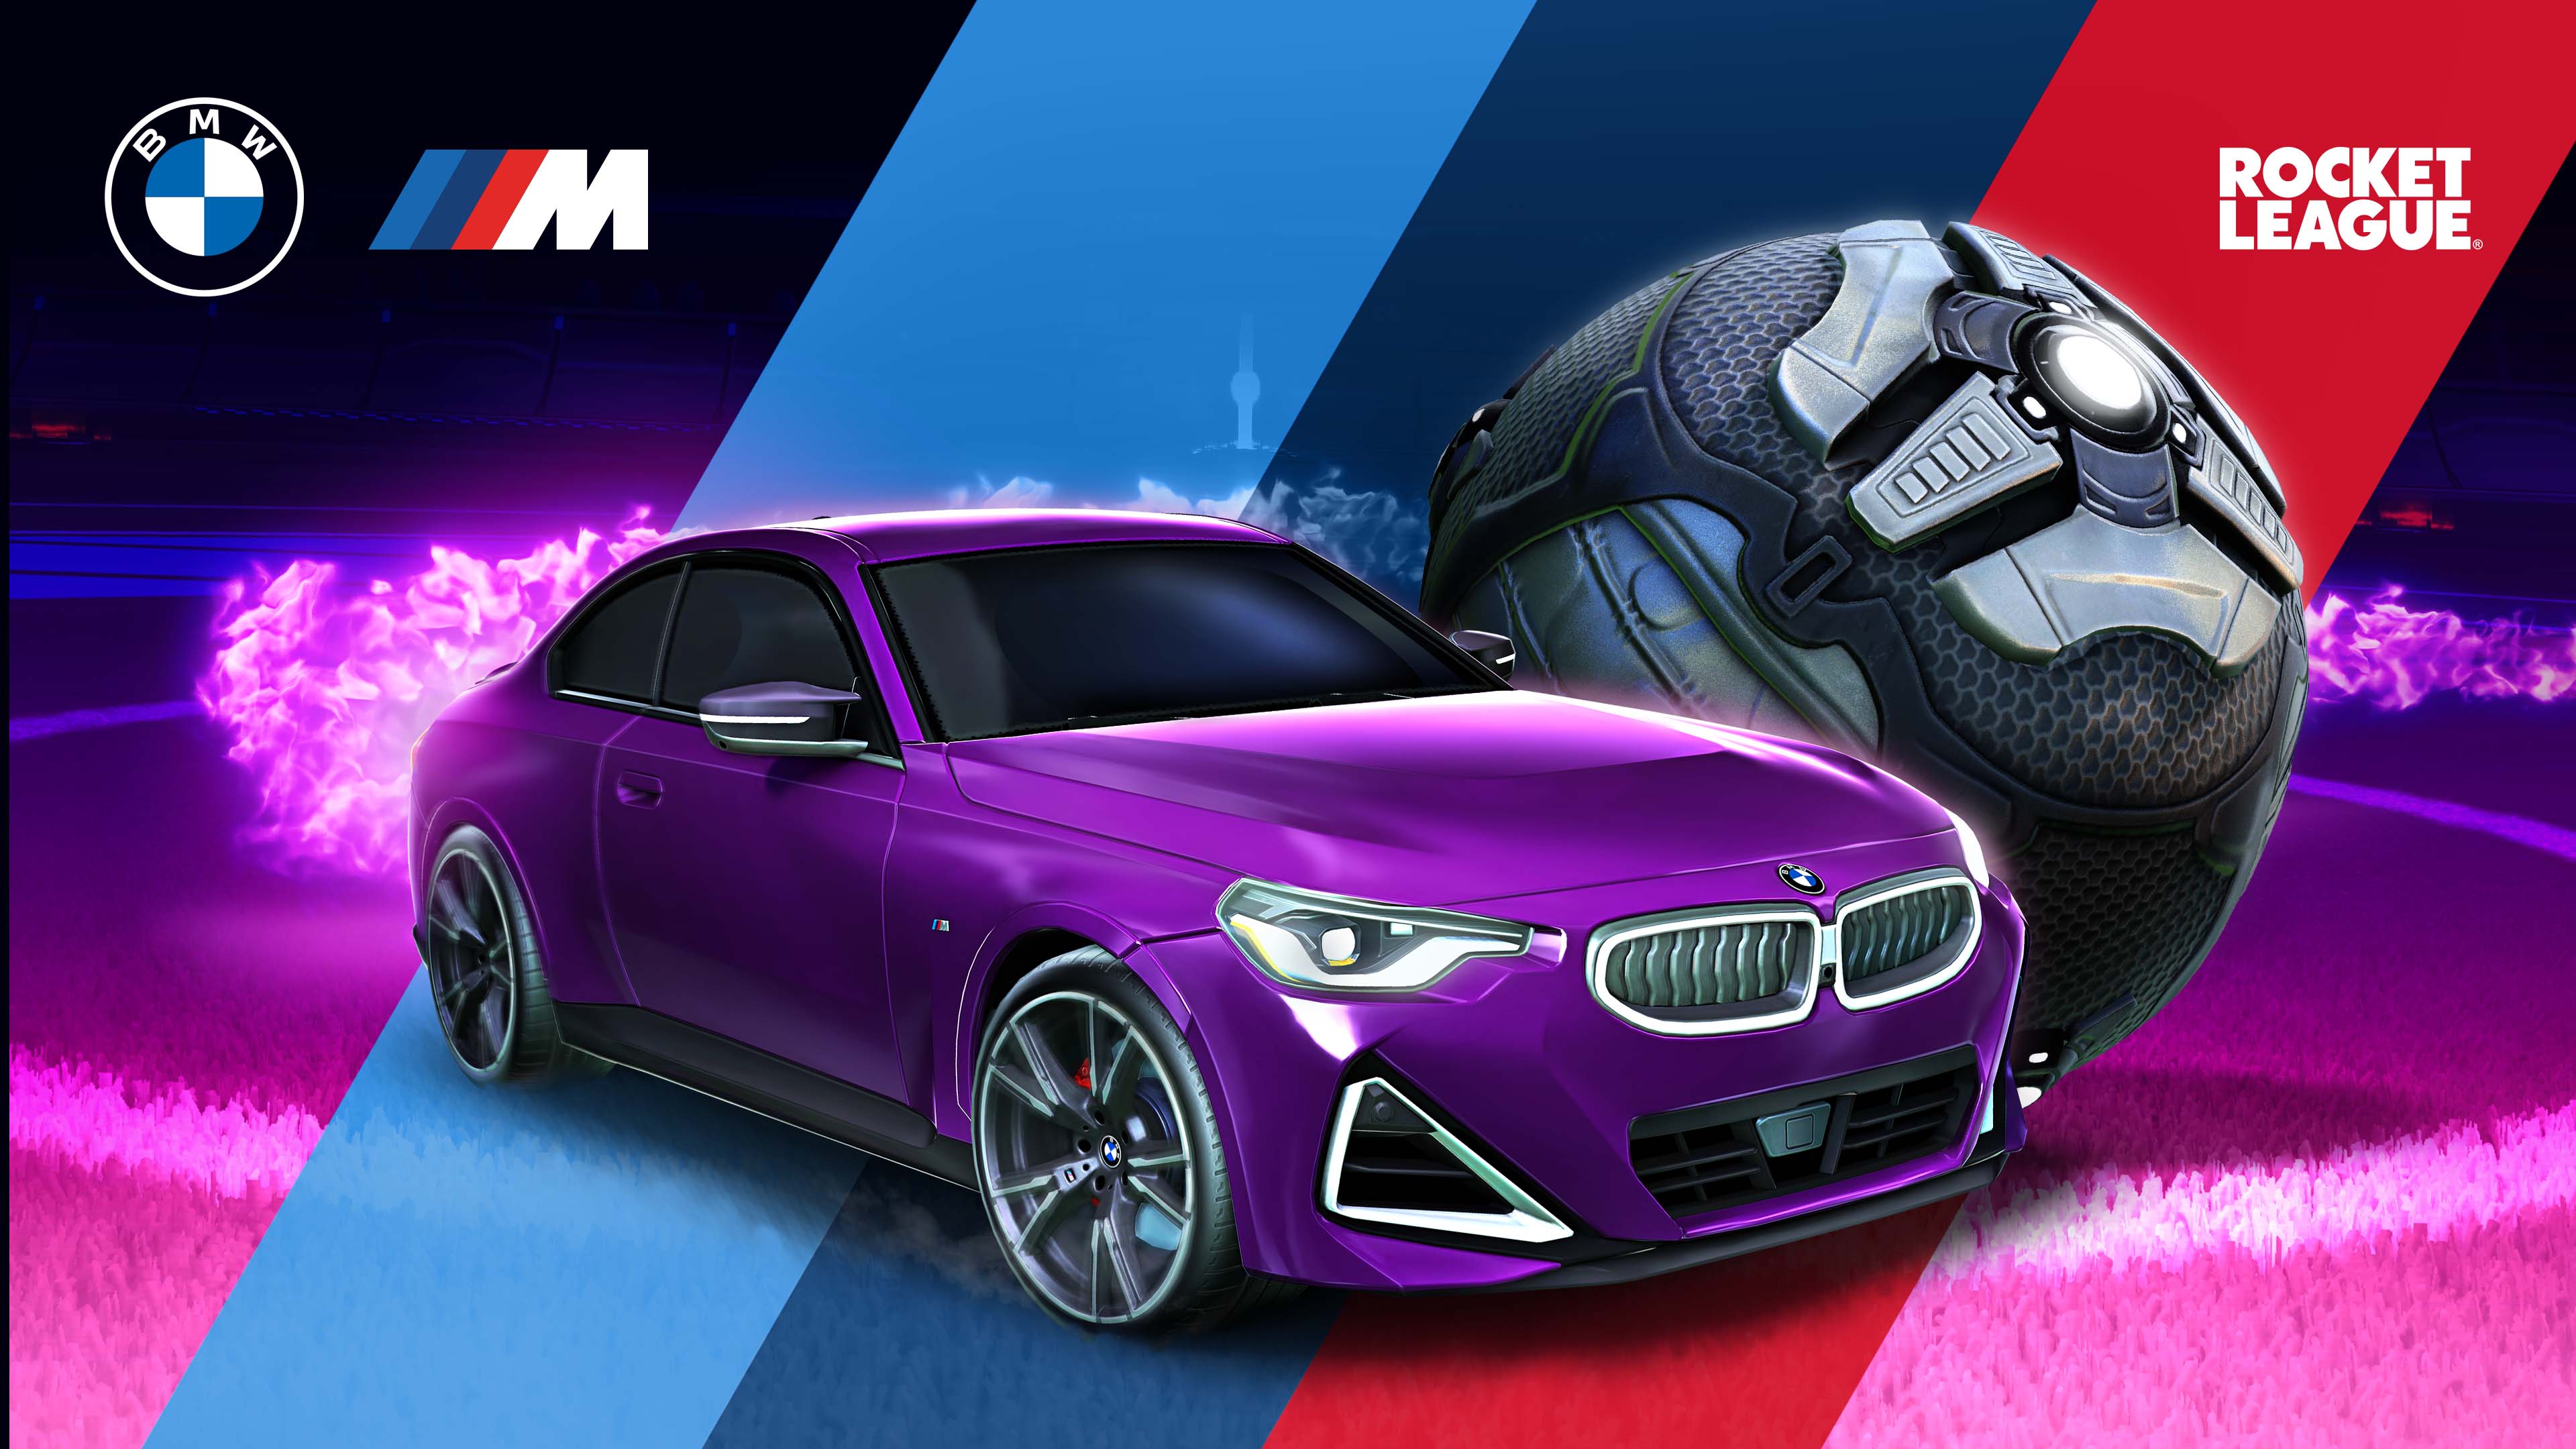 Ahead of its Middle East arrival, the dynamic BMW M240i is unveiled digitally in hit Esports game Rocket League